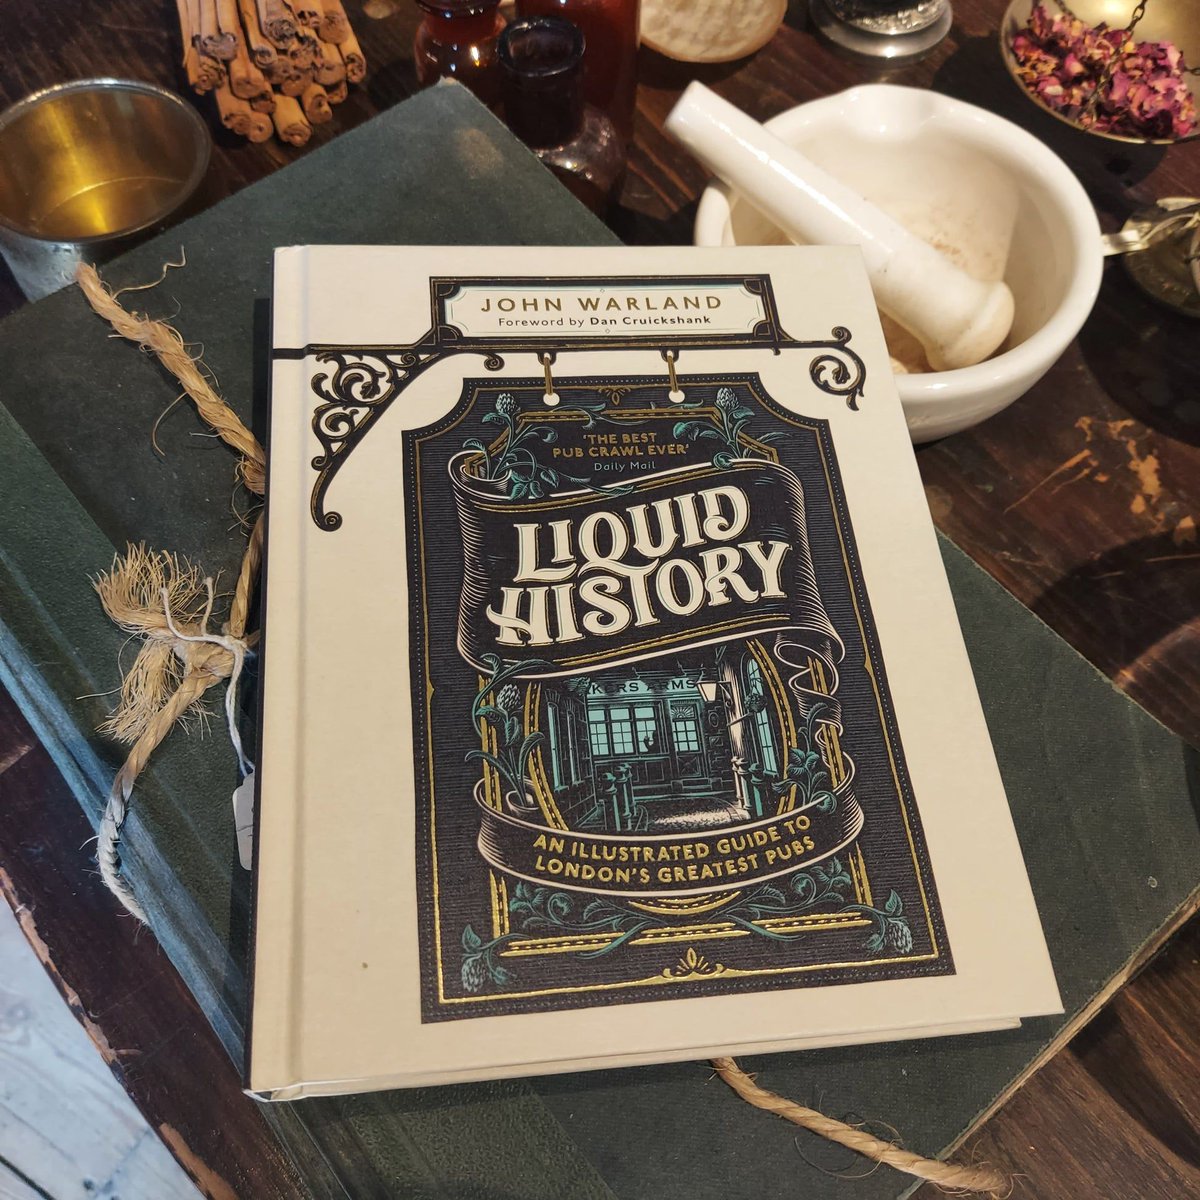 'Liquid History' is a beautiful illustrated guide to London's best pubs, written by the city's leading pub tour guide and host of the celebrated Liquid History Tours, John Warland! Find it now in the #OldOpShop: 👉 buff.ly/4dgioi0